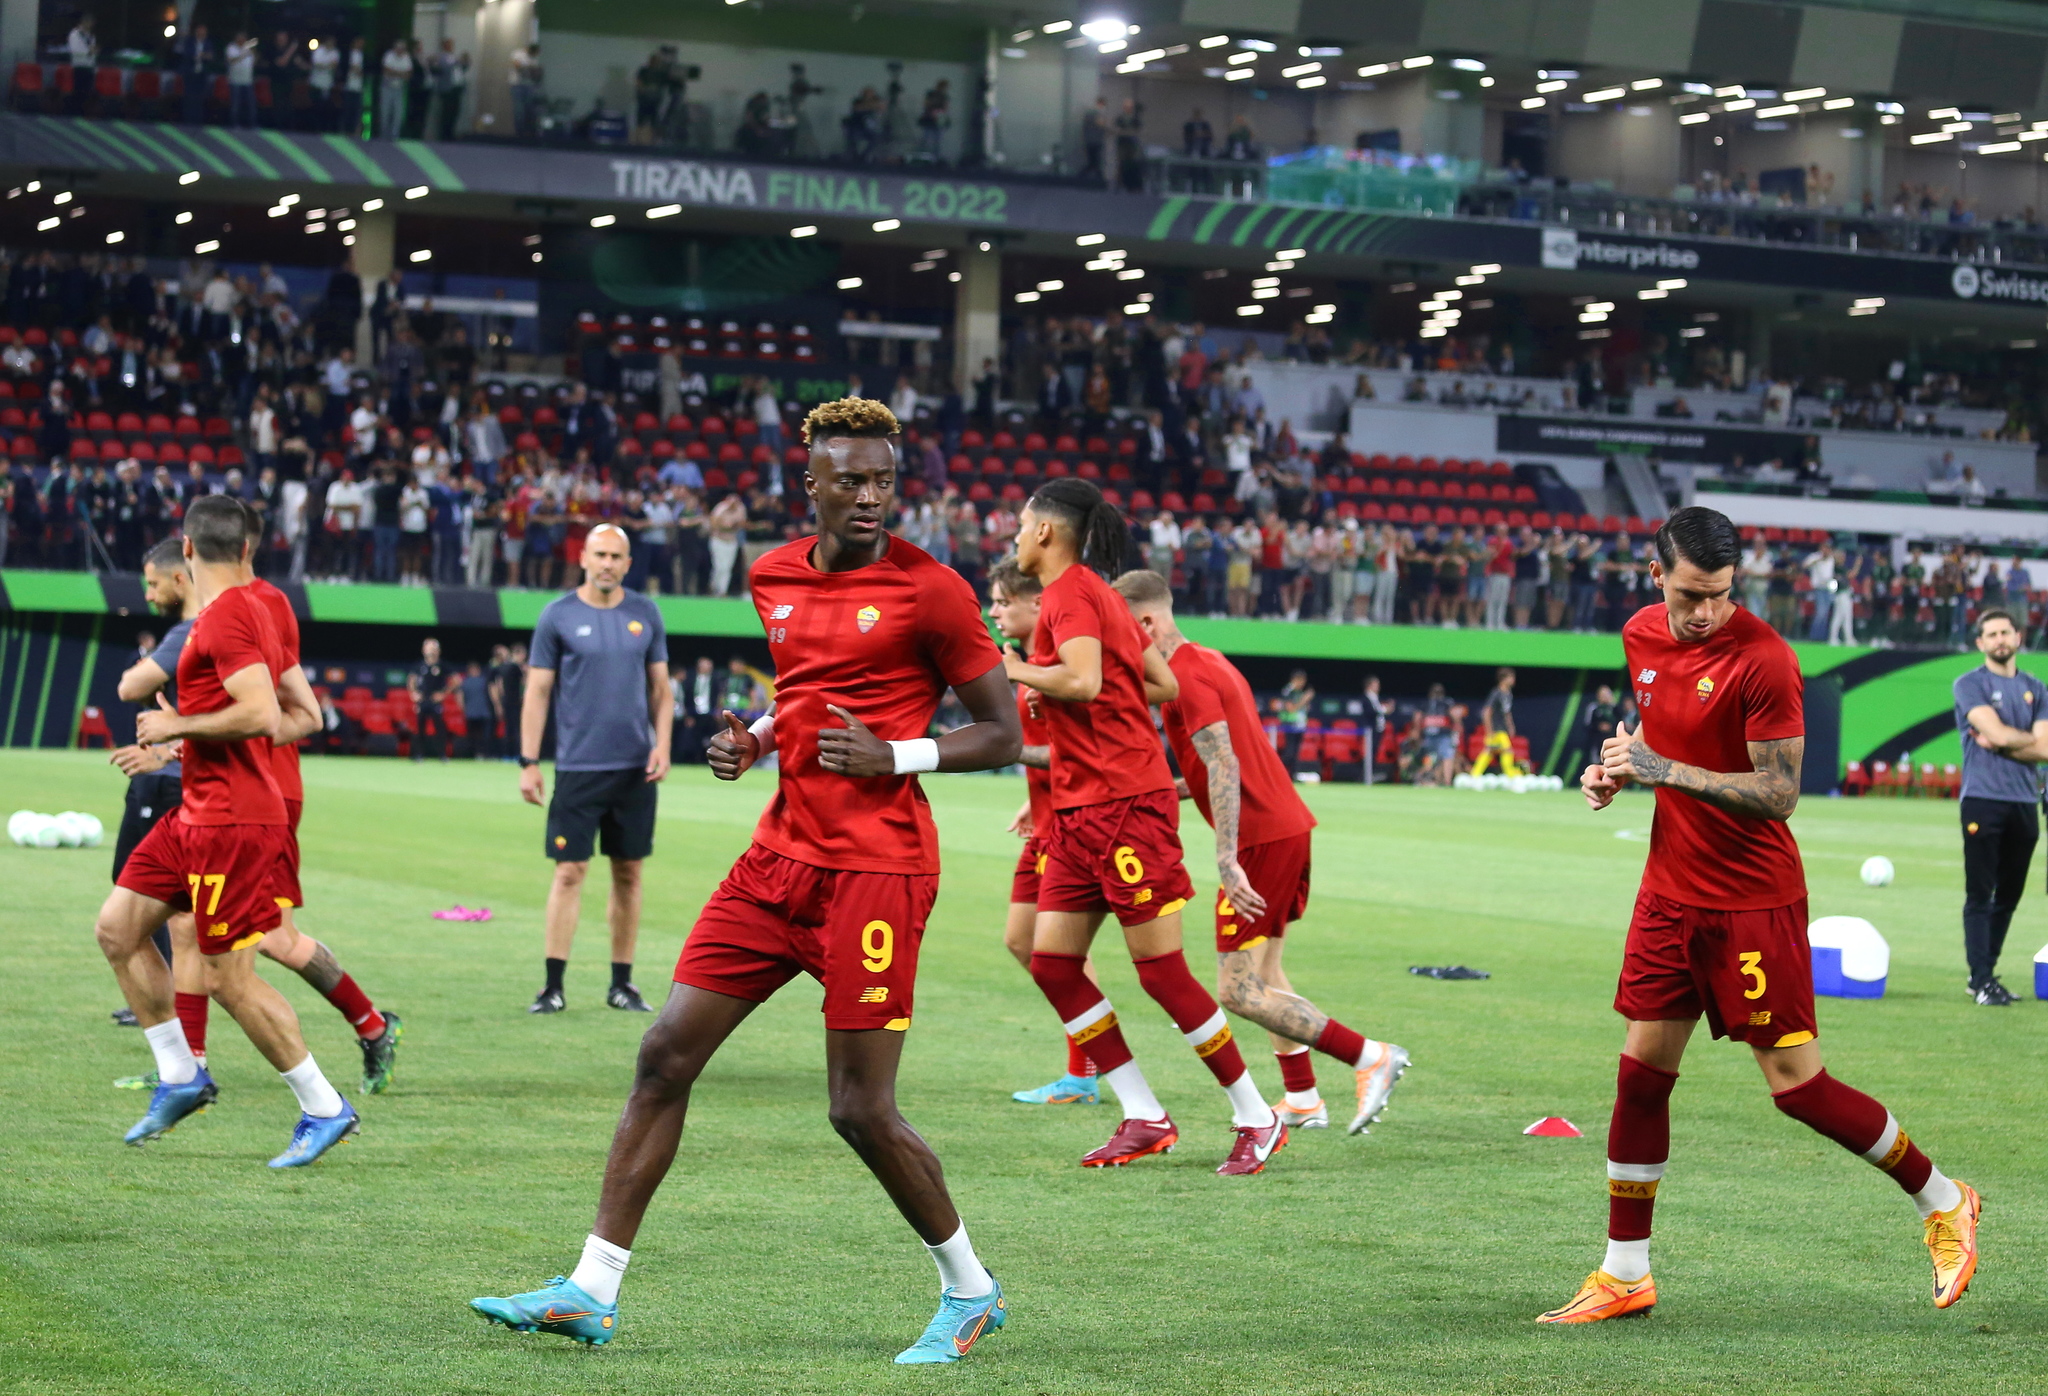 Tirana (Albania), 25/05/2022.- Roma players Tammy Abraham (front L) and Roger Ibanez (R) warm up for the UEFA Europa  lt;HIT gt;Conference lt;/HIT gt; League final between AS Roma and Feyenoord Rotterdam at National Arena in Tirana, Albania, 25 May 2022. EFE/EPA/Malton Dibra